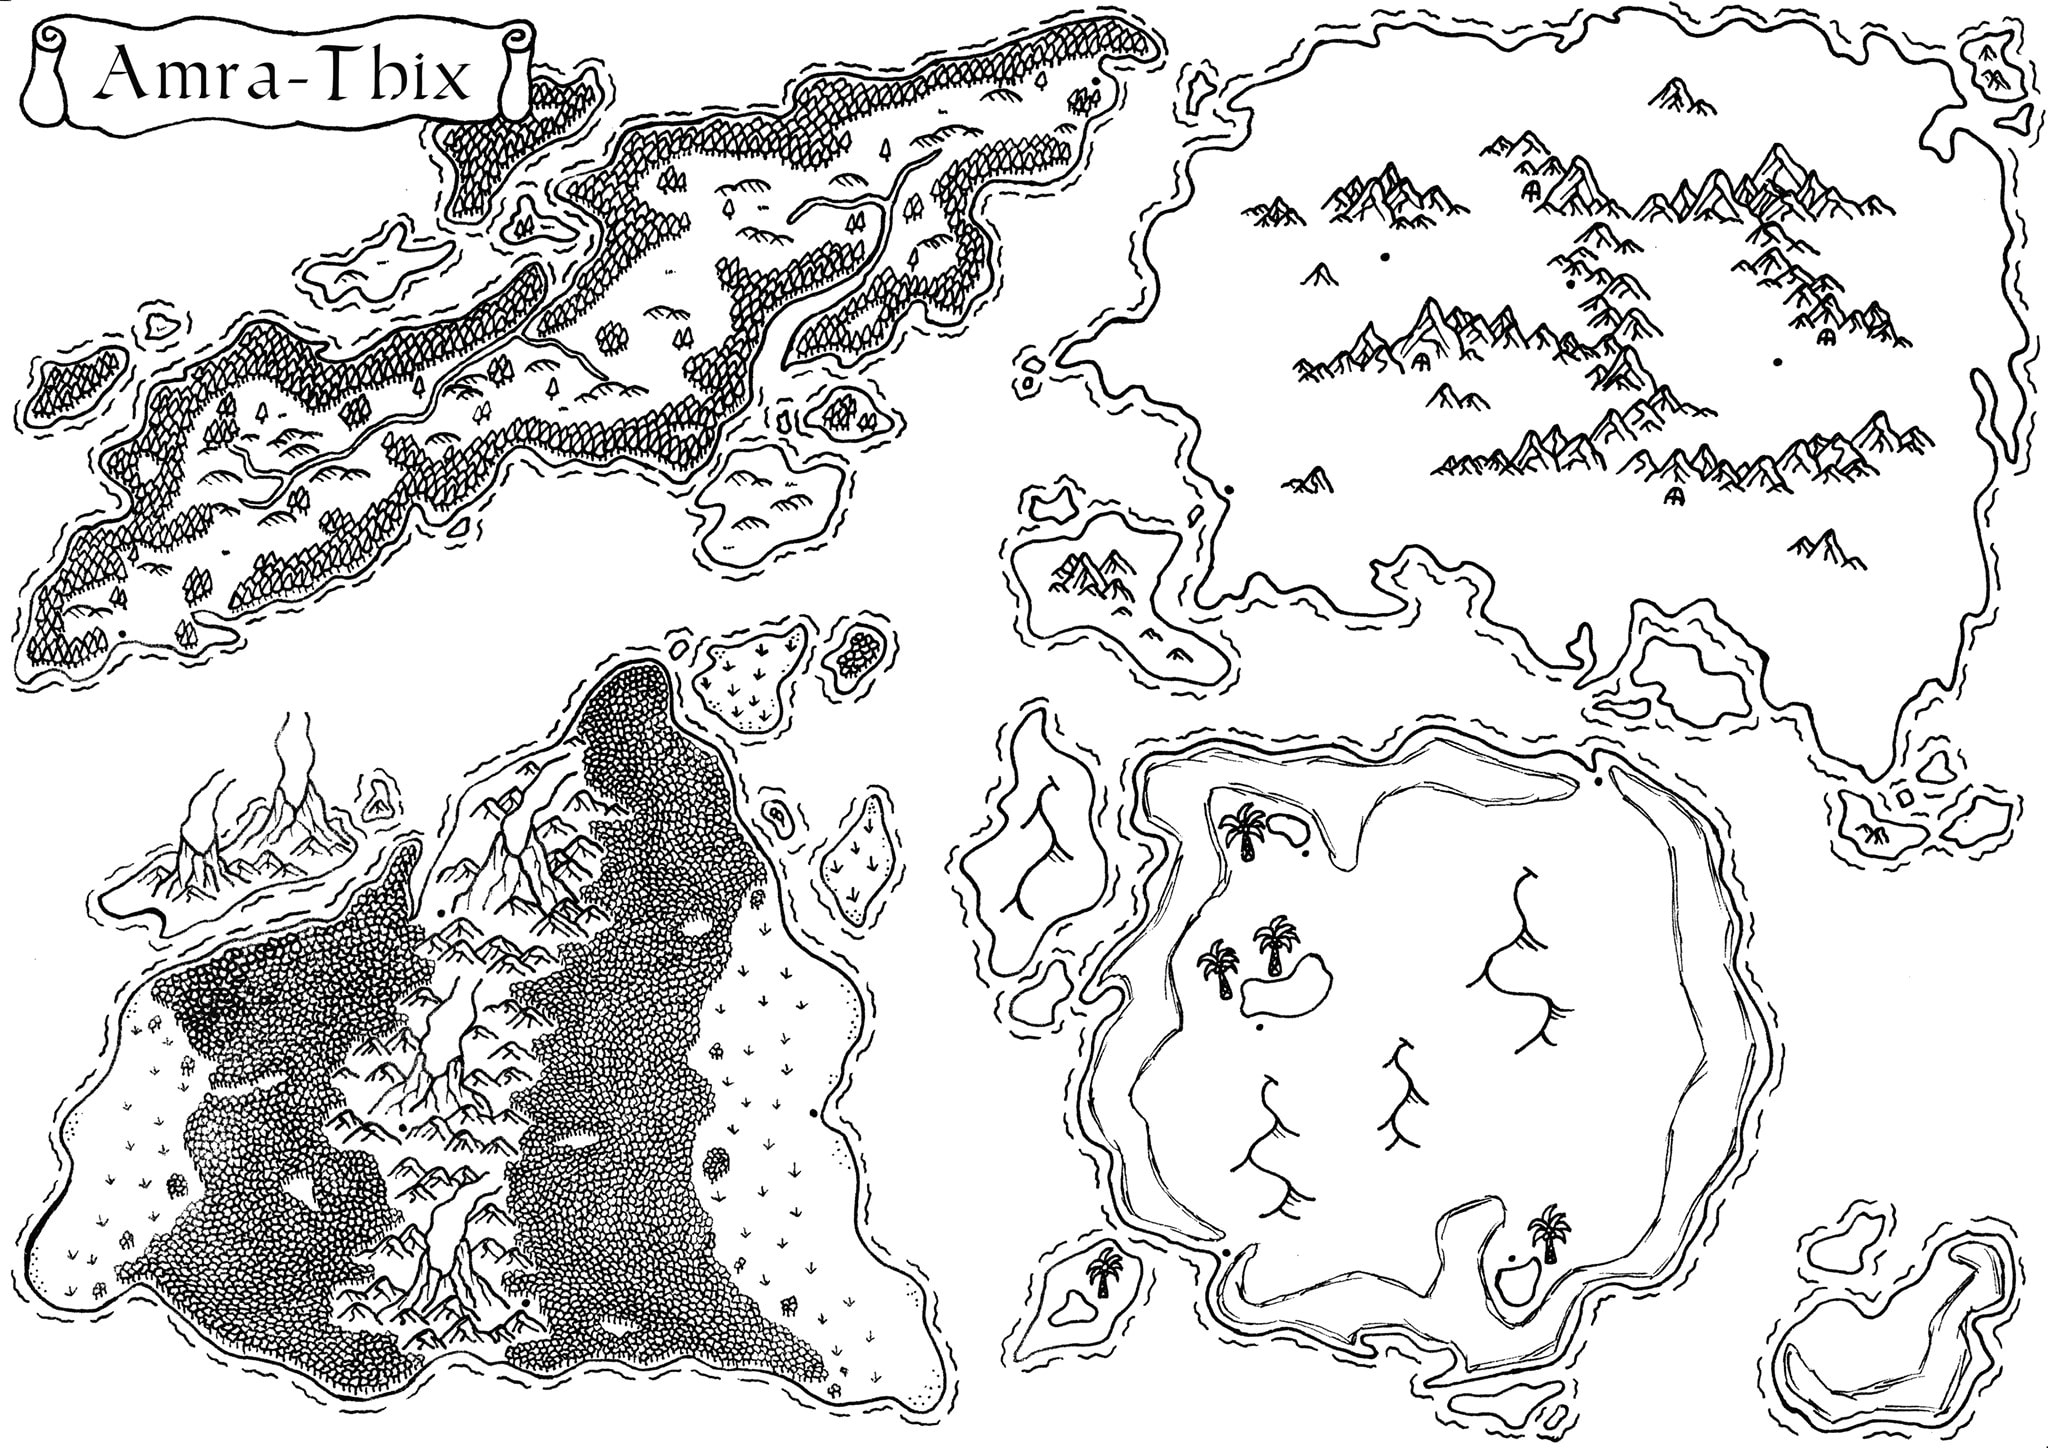 drawing a fantasy world map Draw Your Fantasy World Map By Clrcreations drawing a fantasy world map